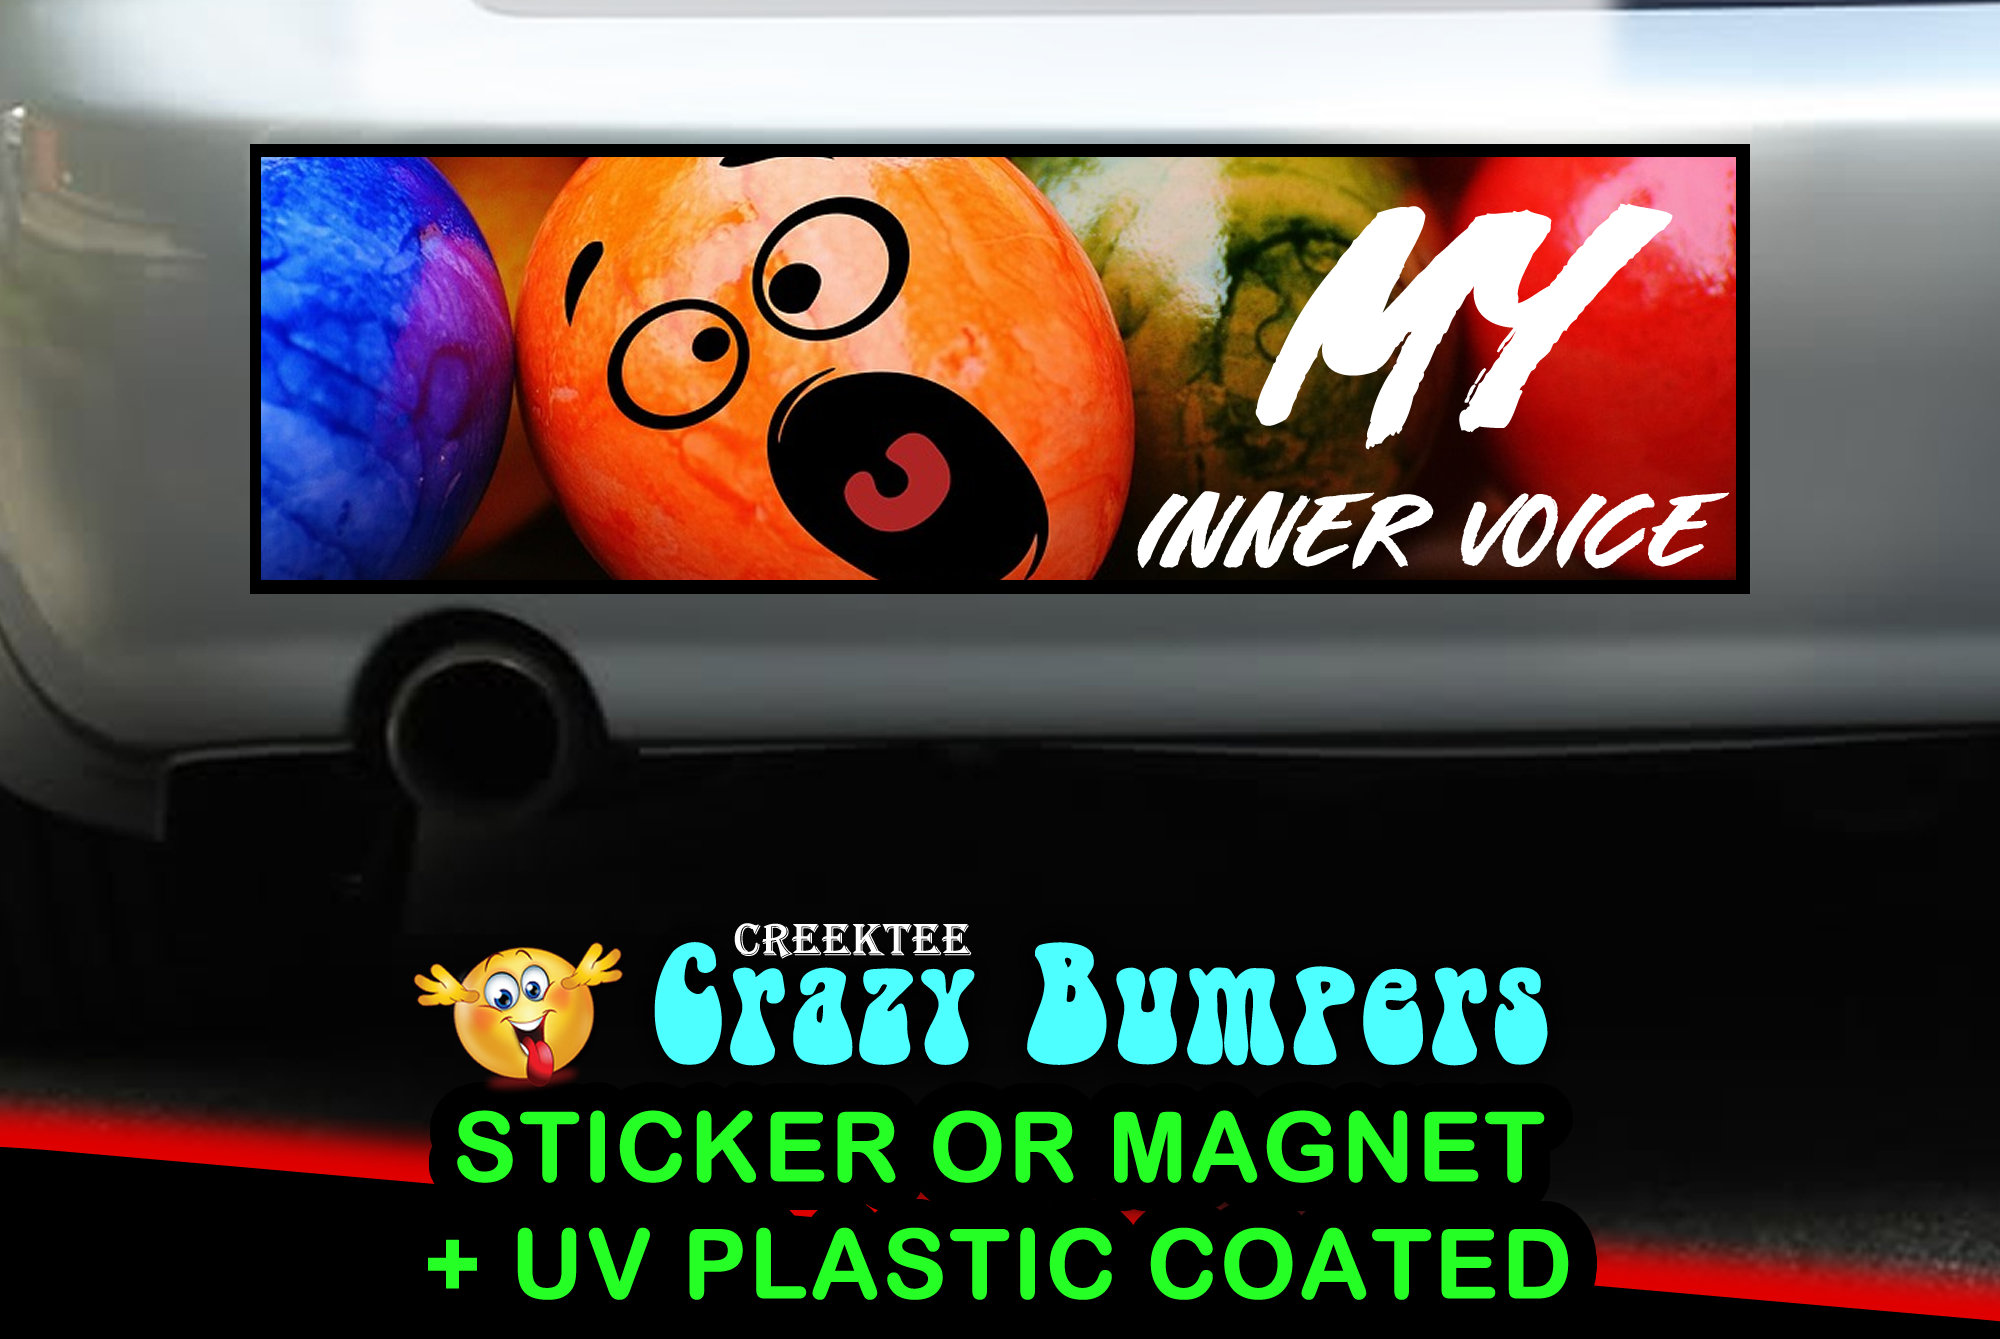 My Inner Voice 10 x 3 Bumper Sticker or Magnetic Bumper Sticker Available